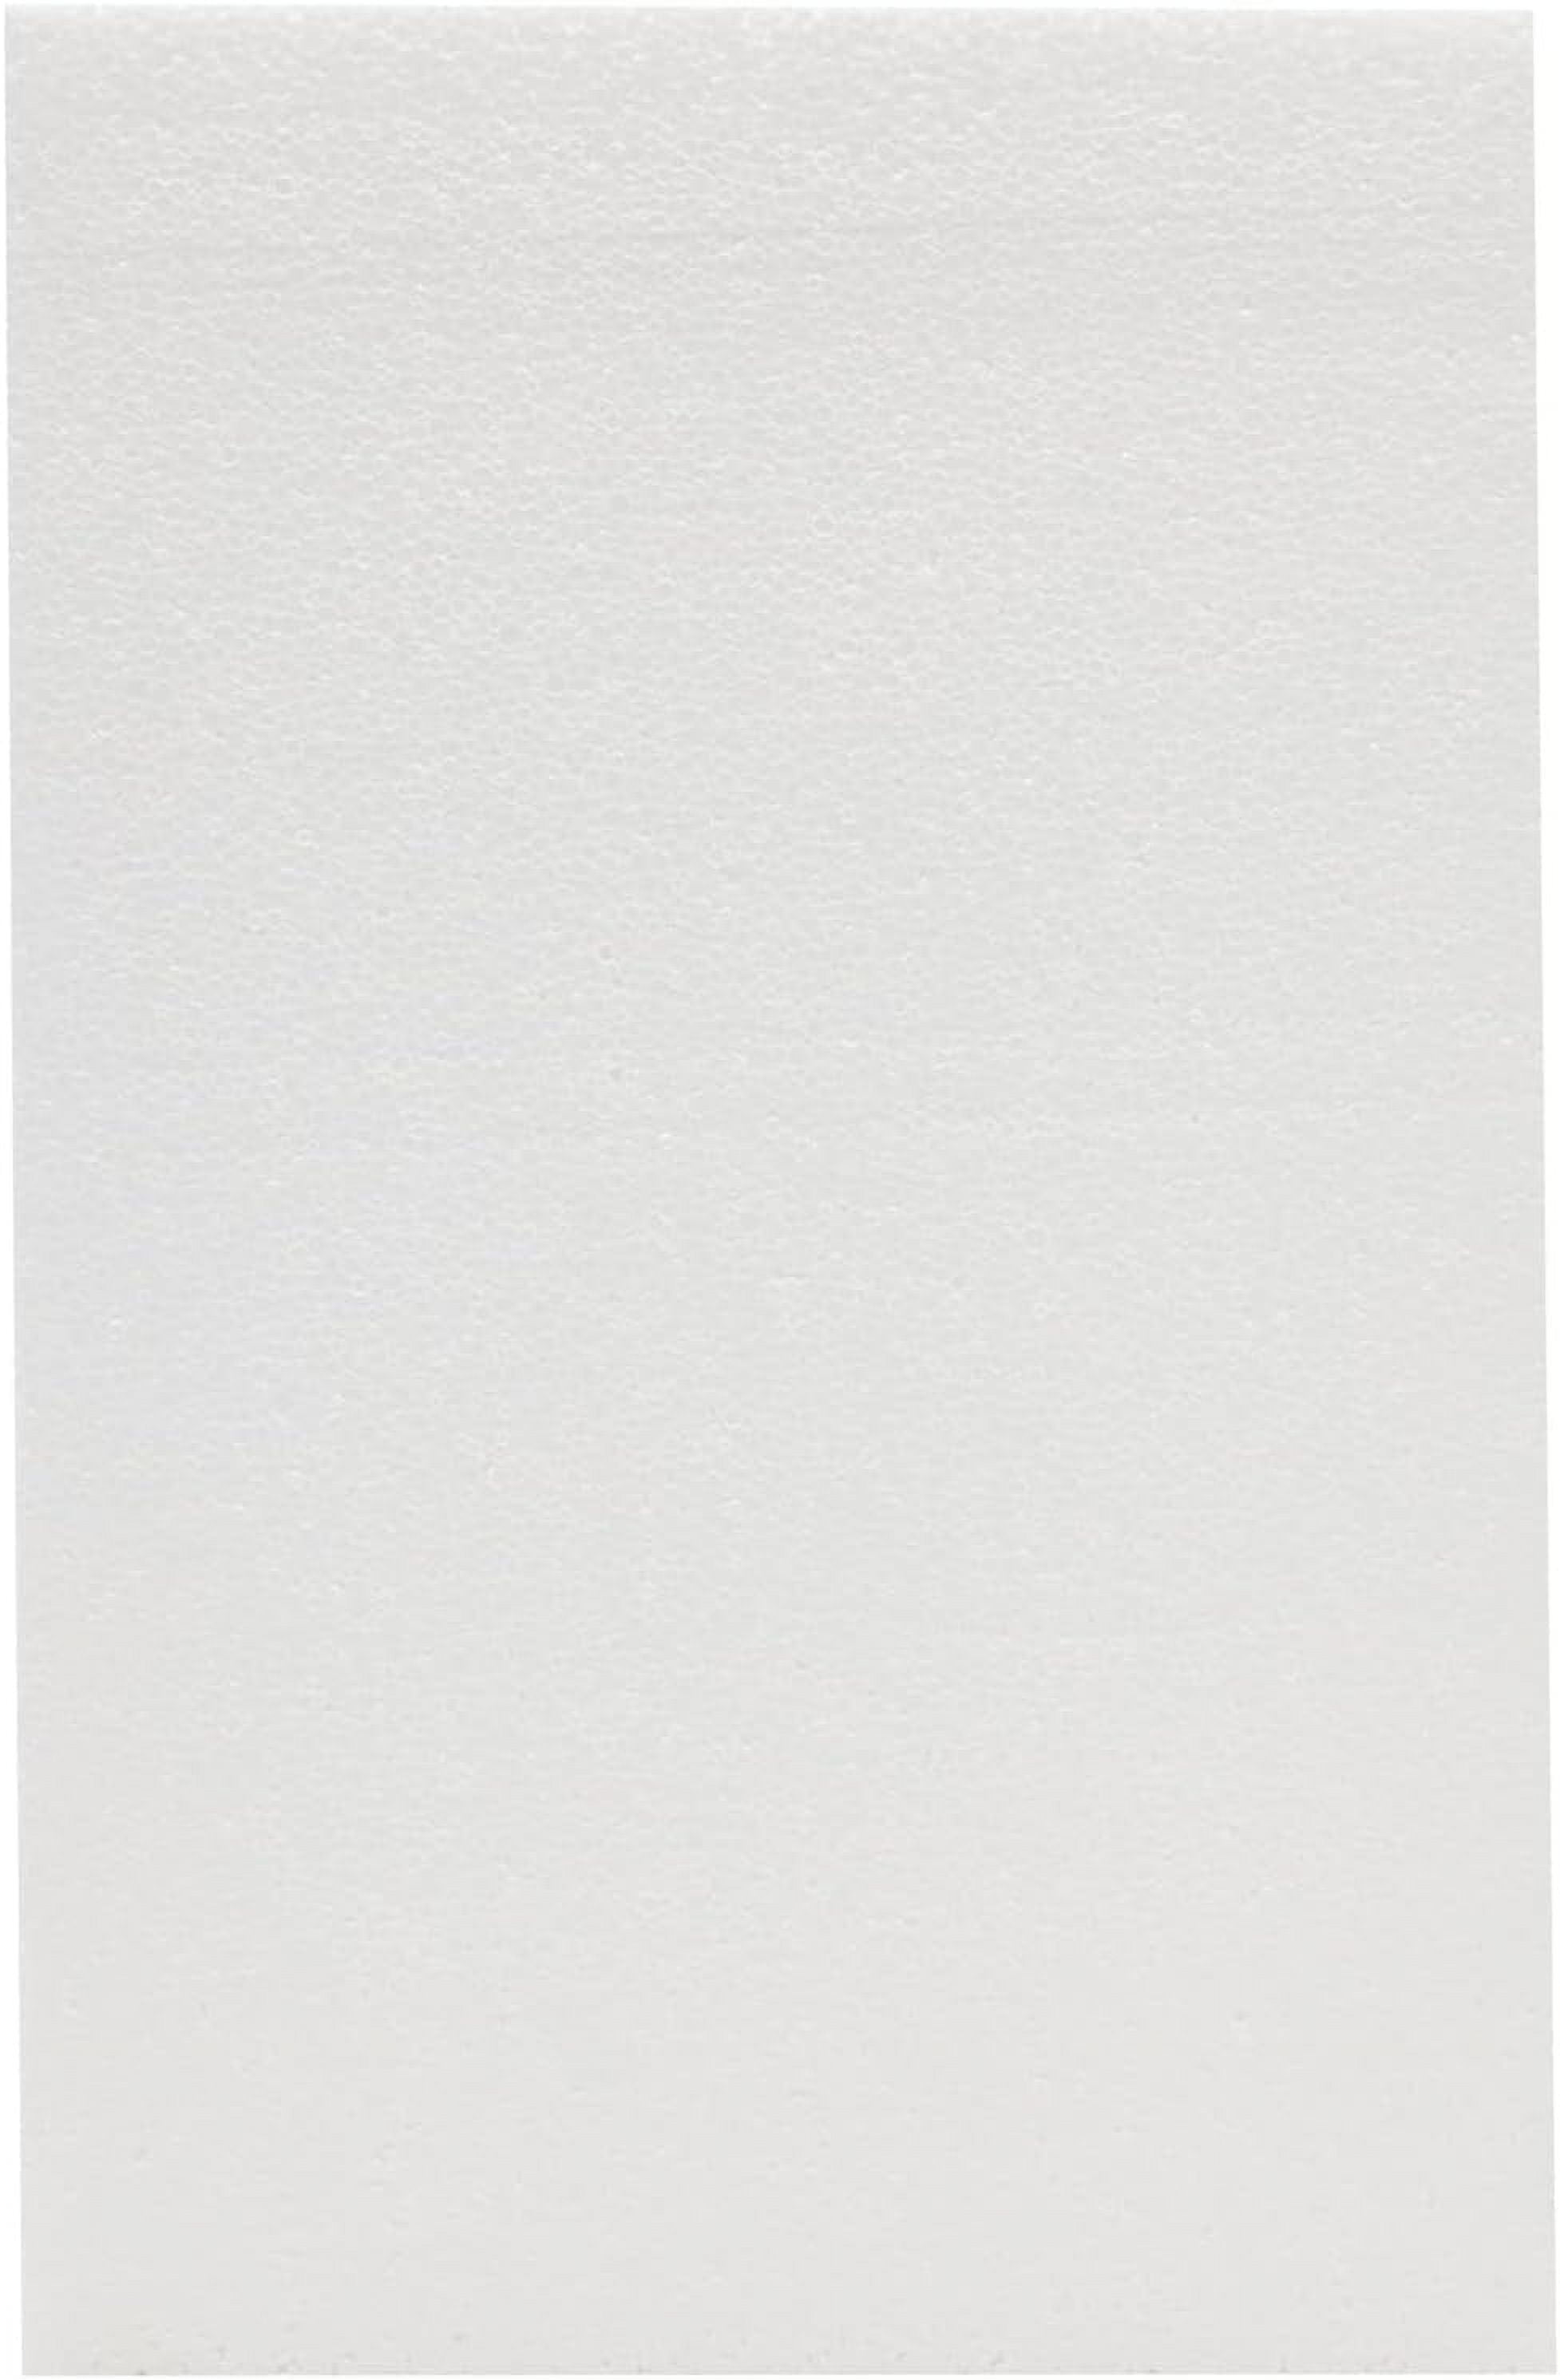 Juvale 1 Inch Thick Foam Board Sheets, 17x11 Polystyrene Rectangles for DIY  crafts, Art Supplies, Sculpture (6 Pack)